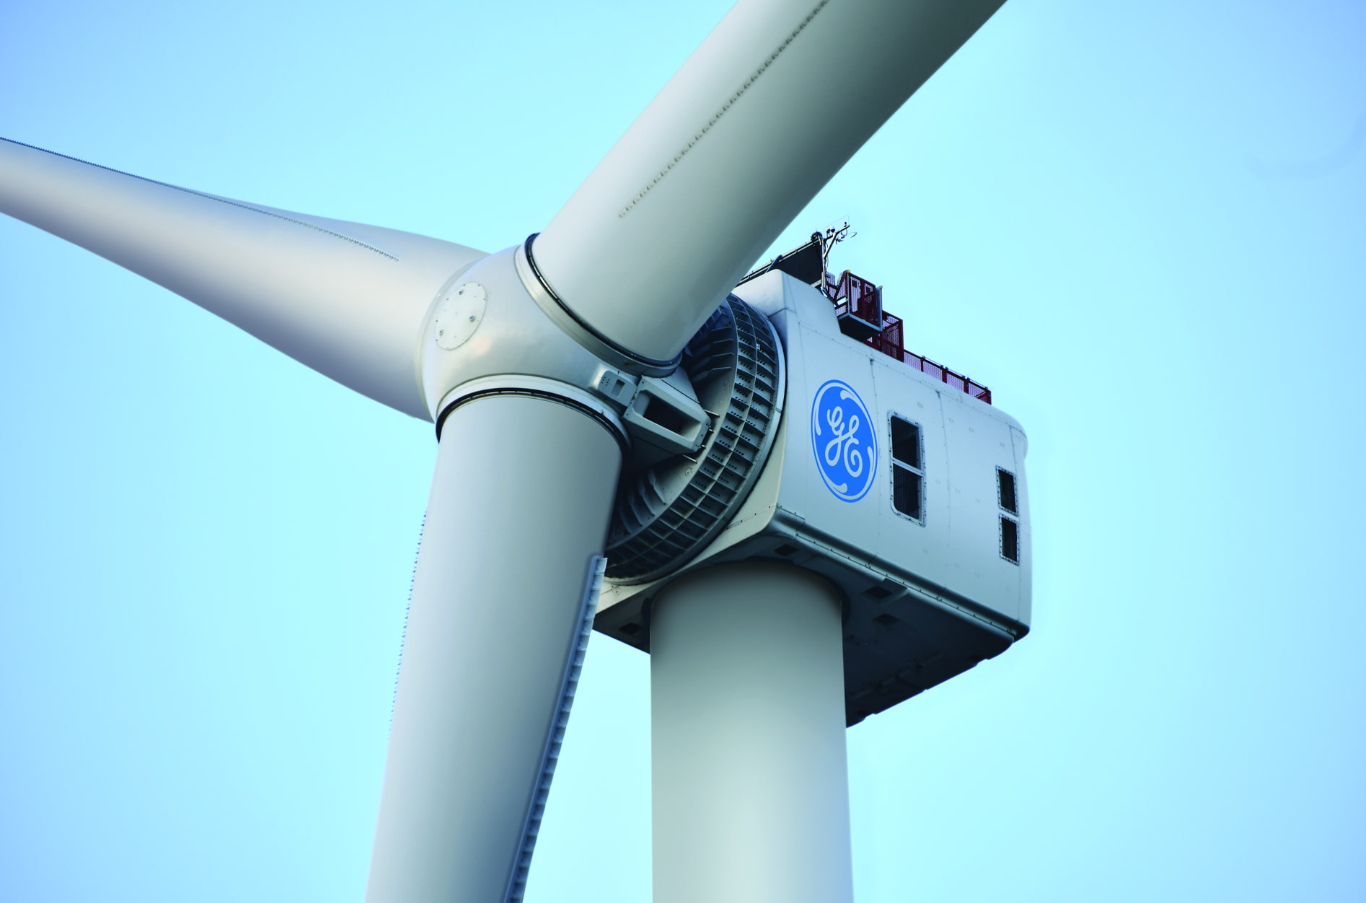 A photo of the rotor of GE's Haliade-X offshore wind turbine